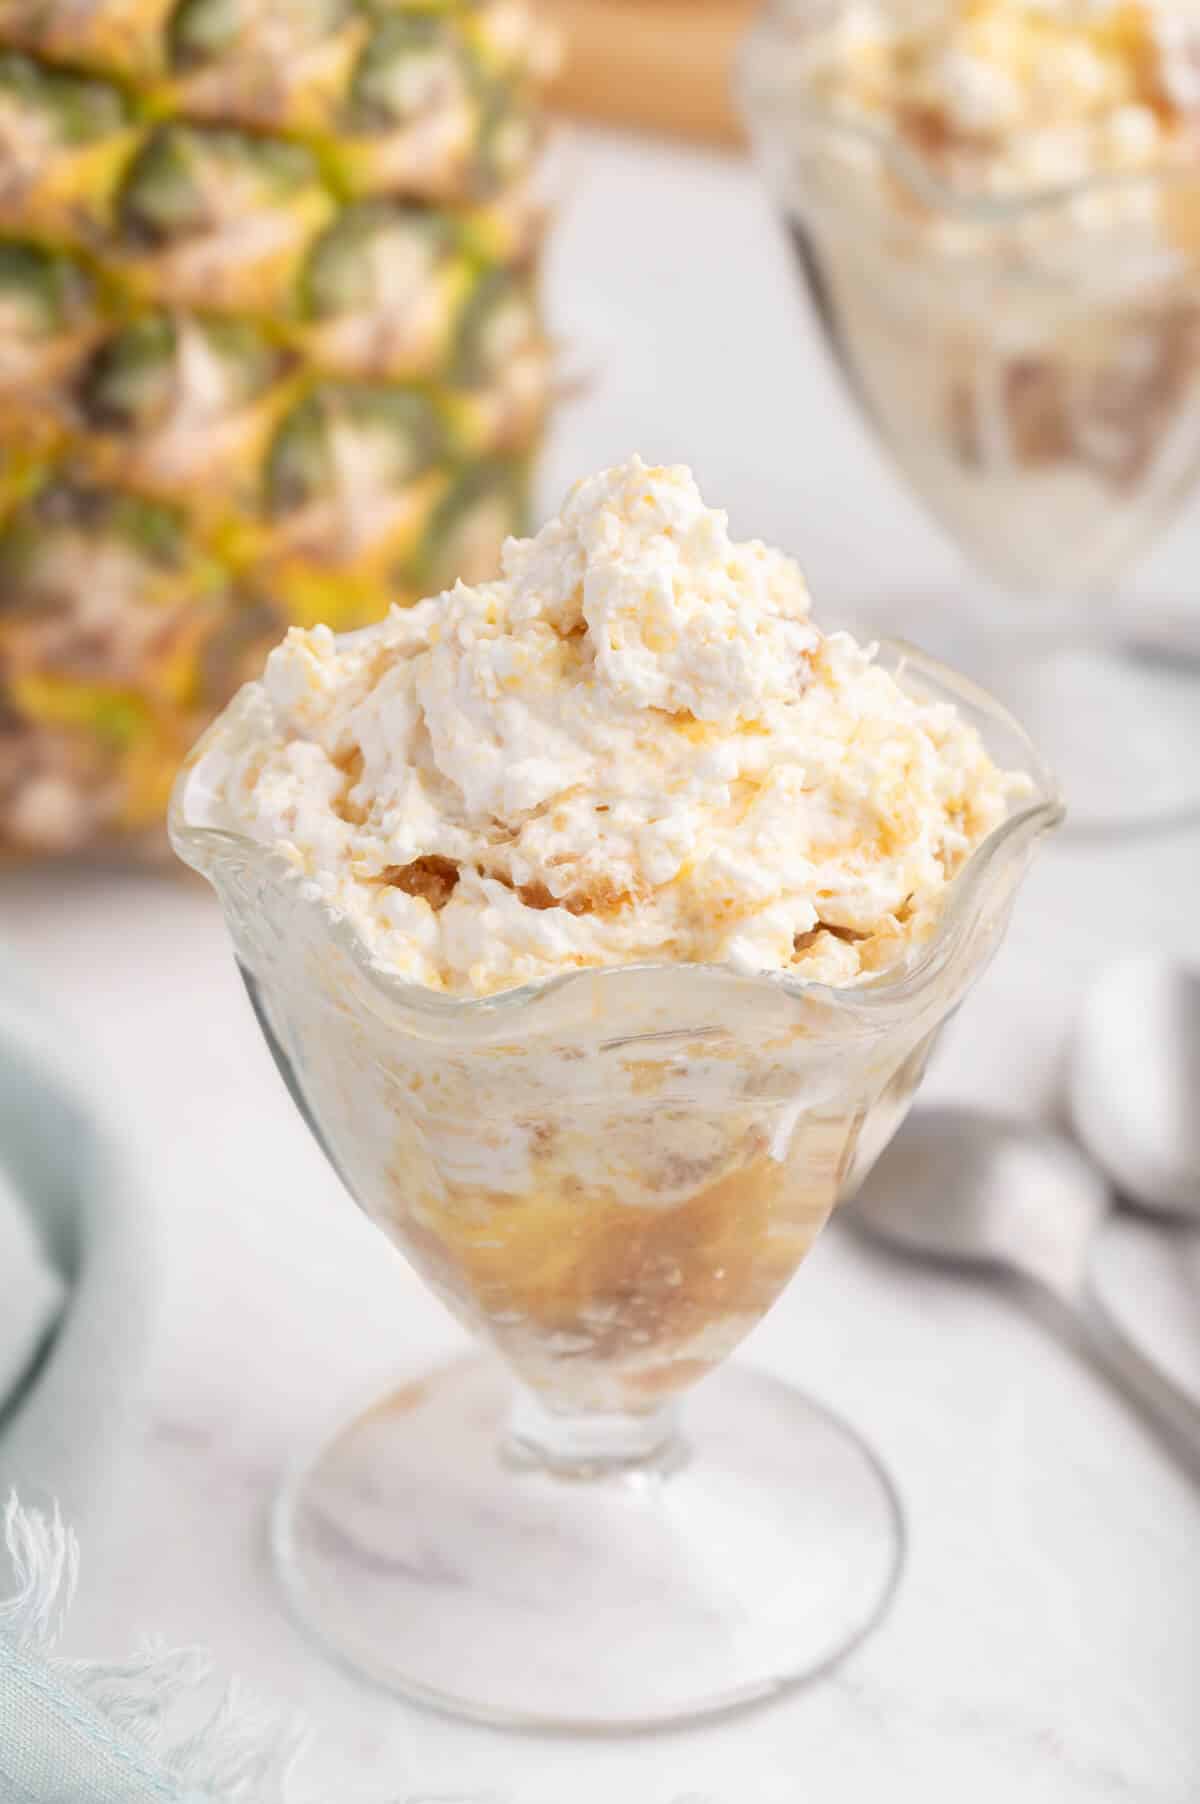 Pineapple delight in a parfait dish.